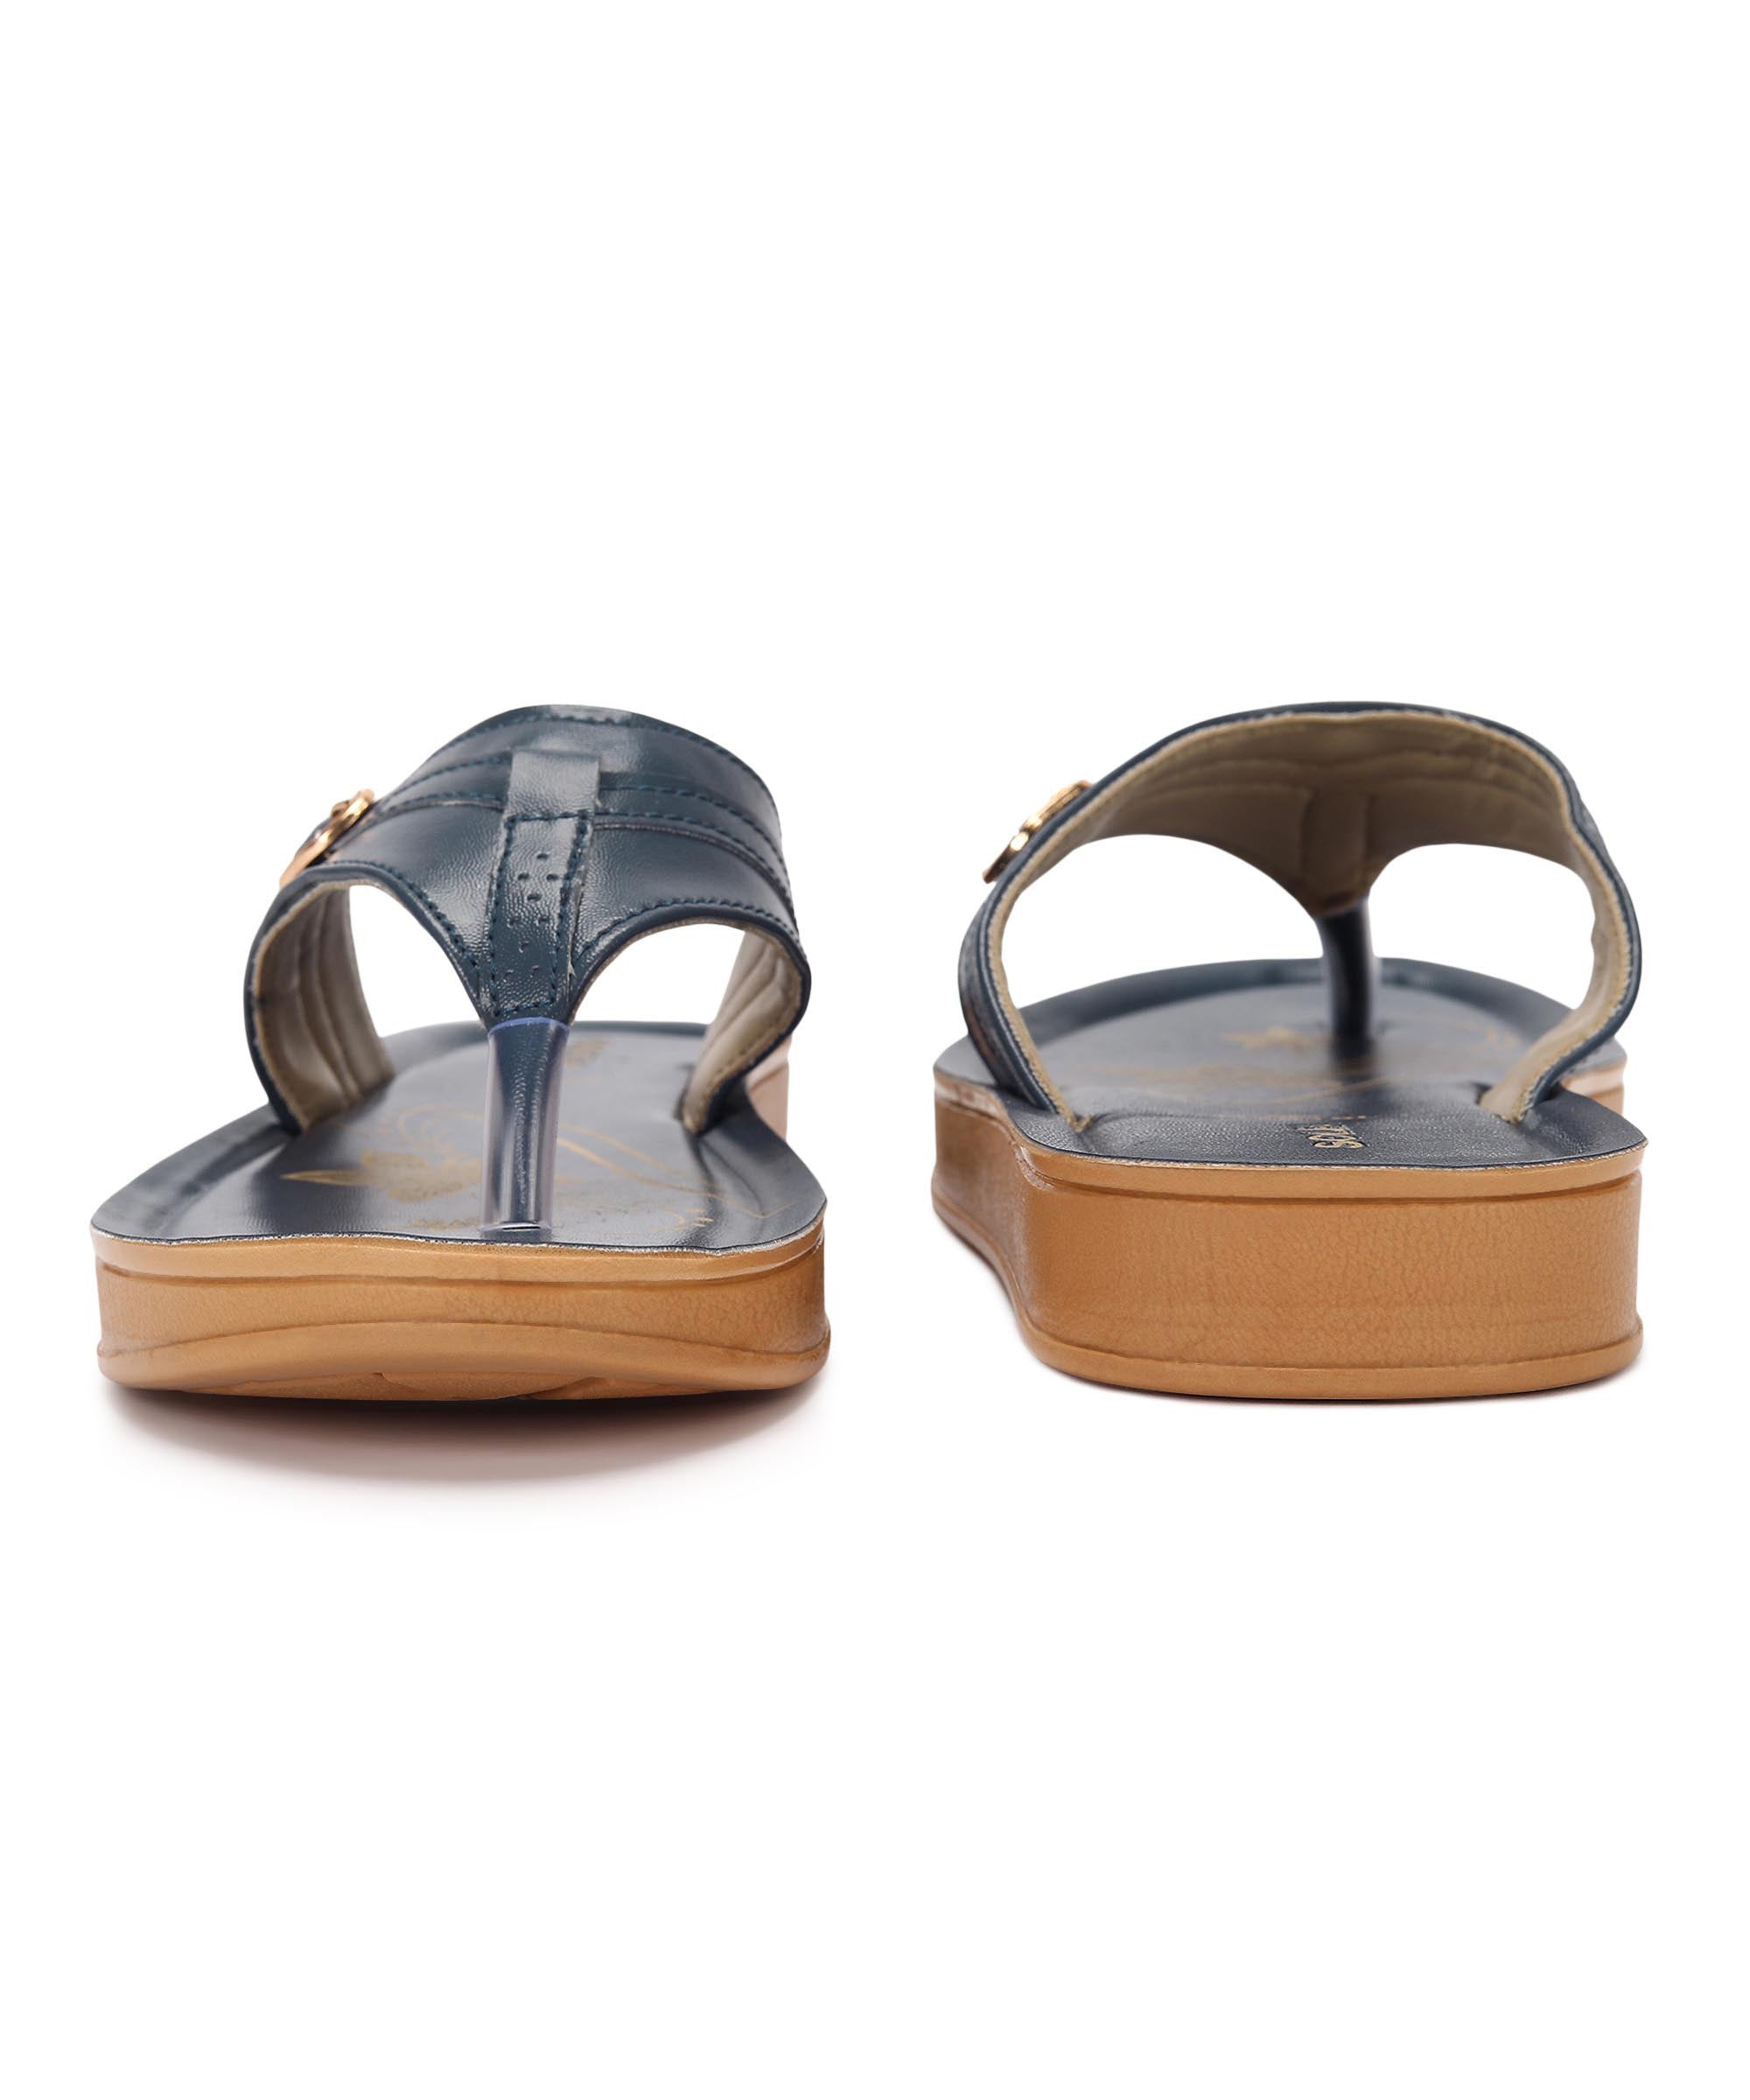 Paragon PUK7010L Women Sandals | Casual &amp; Formal Sandals | Stylish, Comfortable &amp; Durable | For Daily &amp; Occasion Wear